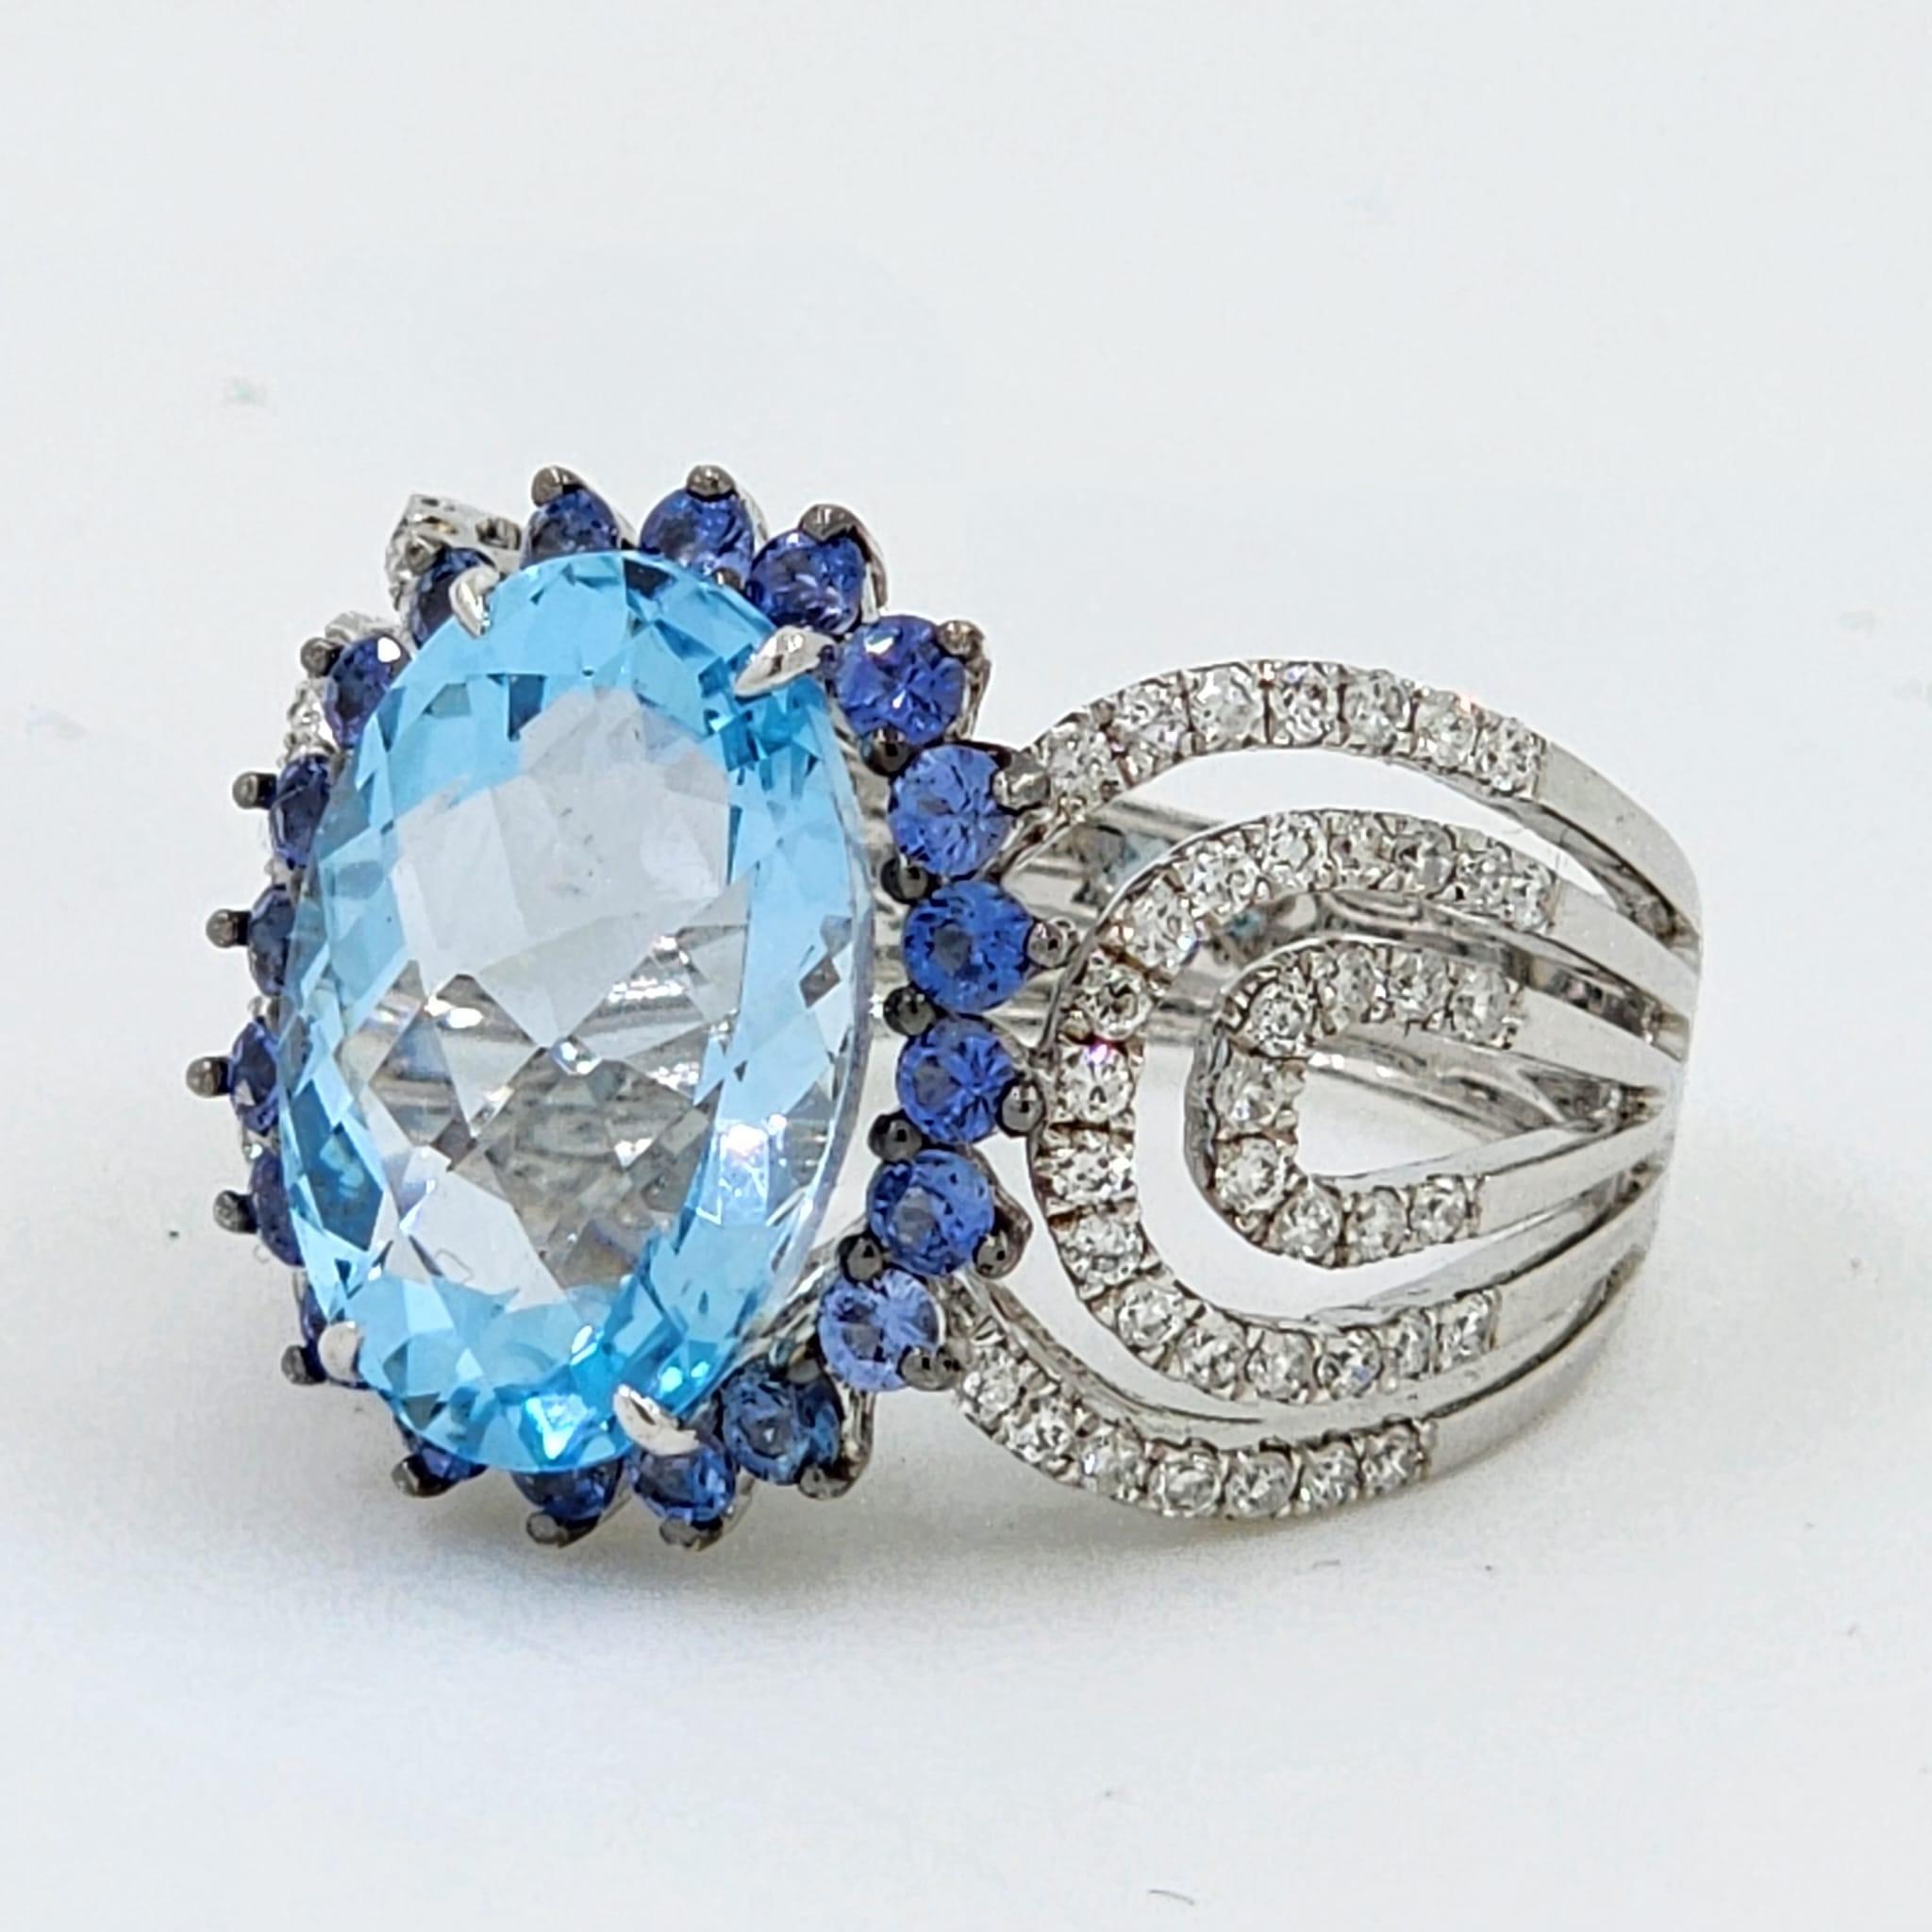 This stunning cocktail ring is a masterpiece of elegance and luxury, featuring a mesmerizing 6.96-carat oval blue topaz at its center. The vivid blue topaz is encircled by a halo of 0.71 carats of brilliant blue sapphires, enhancing its vibrant hue